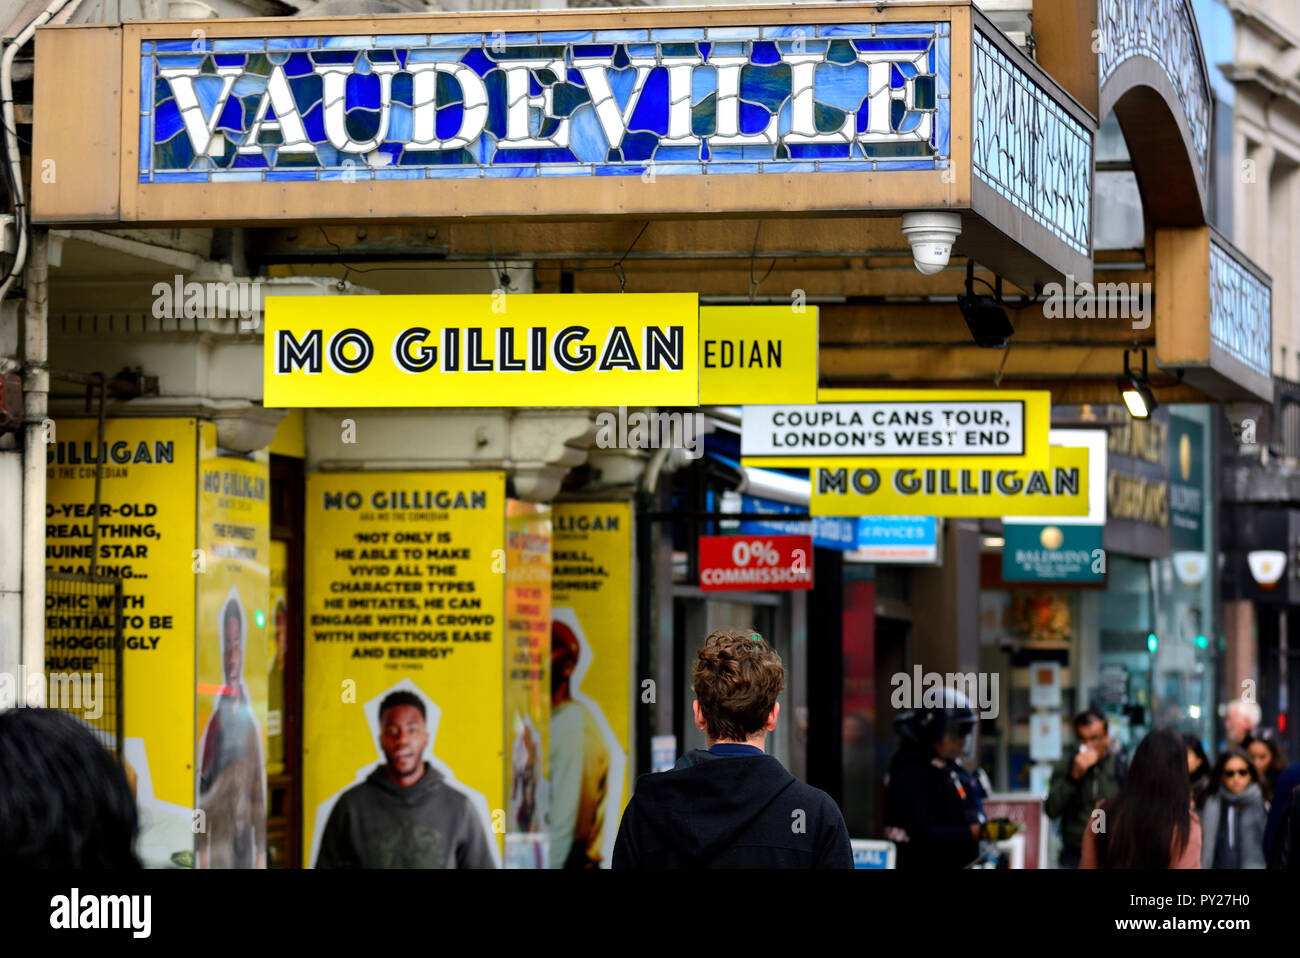 Mo Gilligan (comedian) at the Vaudeville Theatre, the Strand, London, England, UK. October 2018 Stock Photo